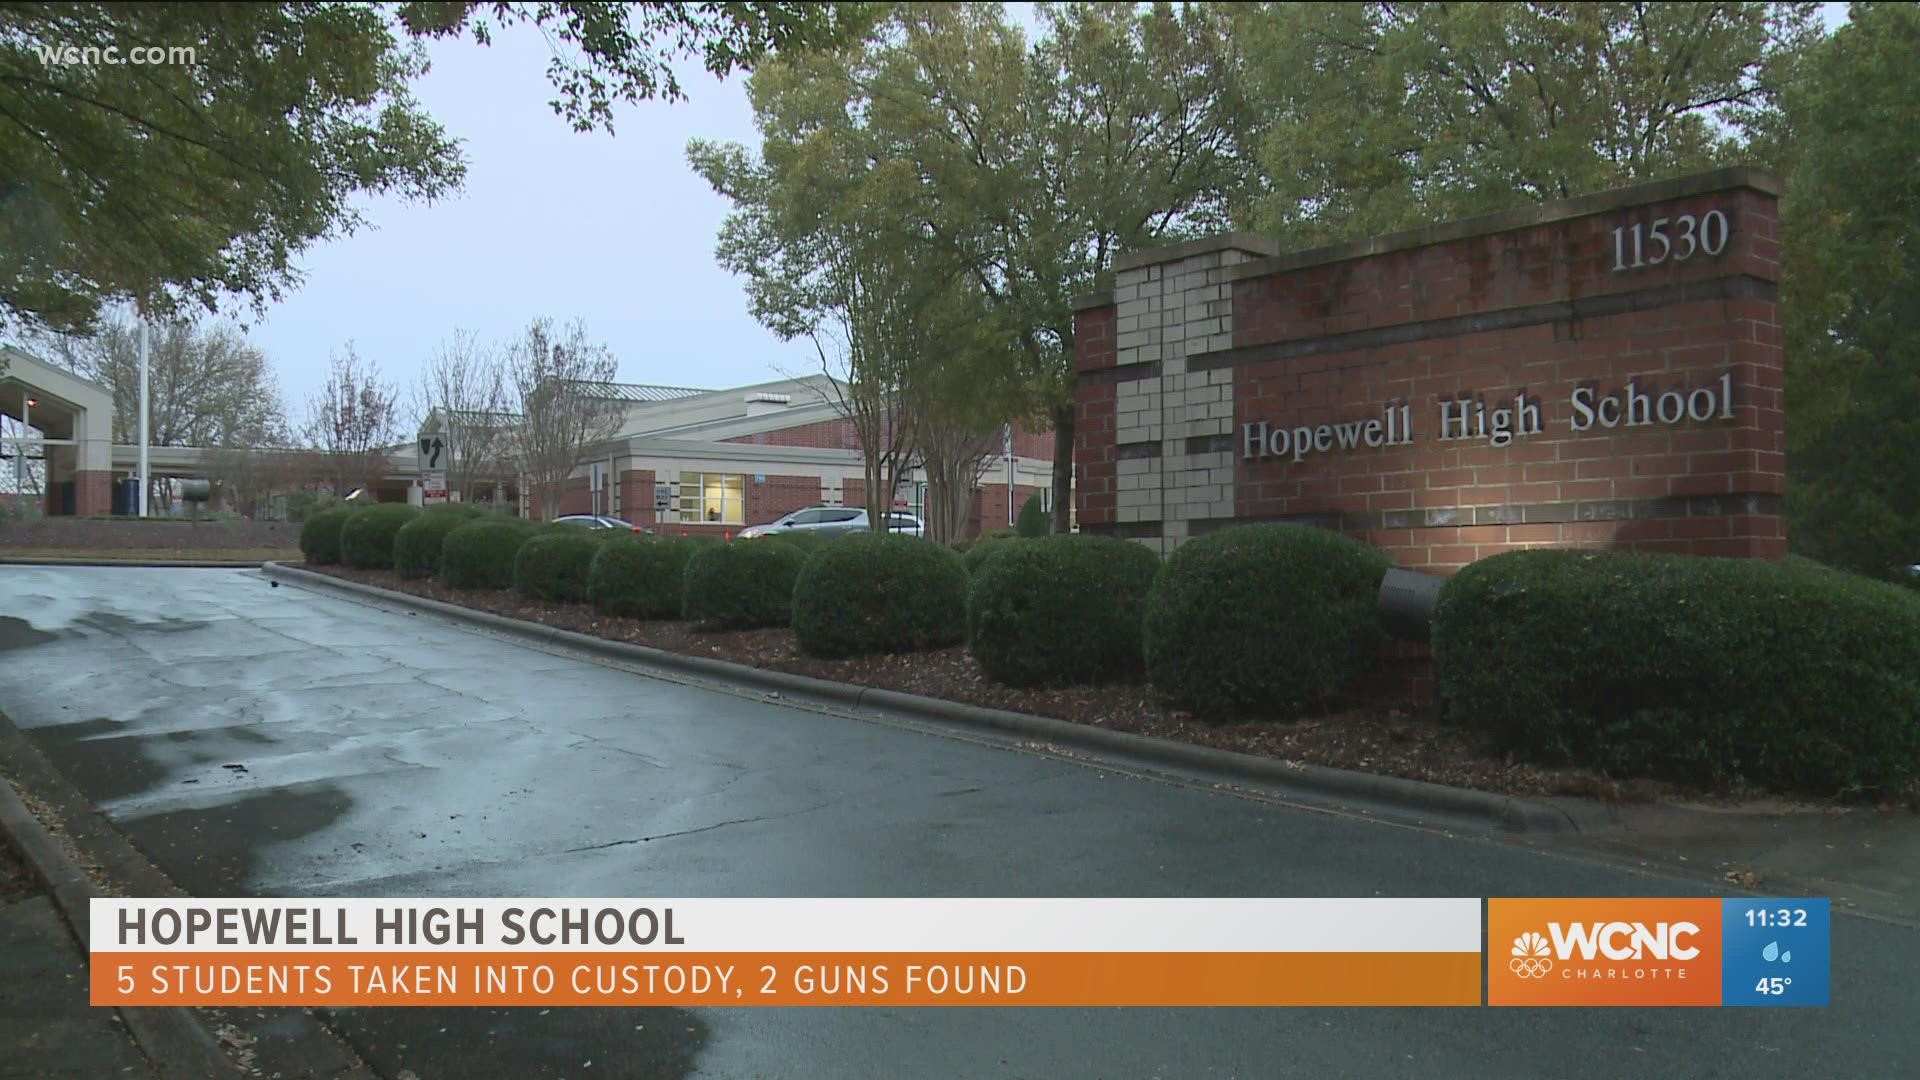 Parents are raising concerns after five students were taken into custody and two guns were found at Hopewell High School this week.